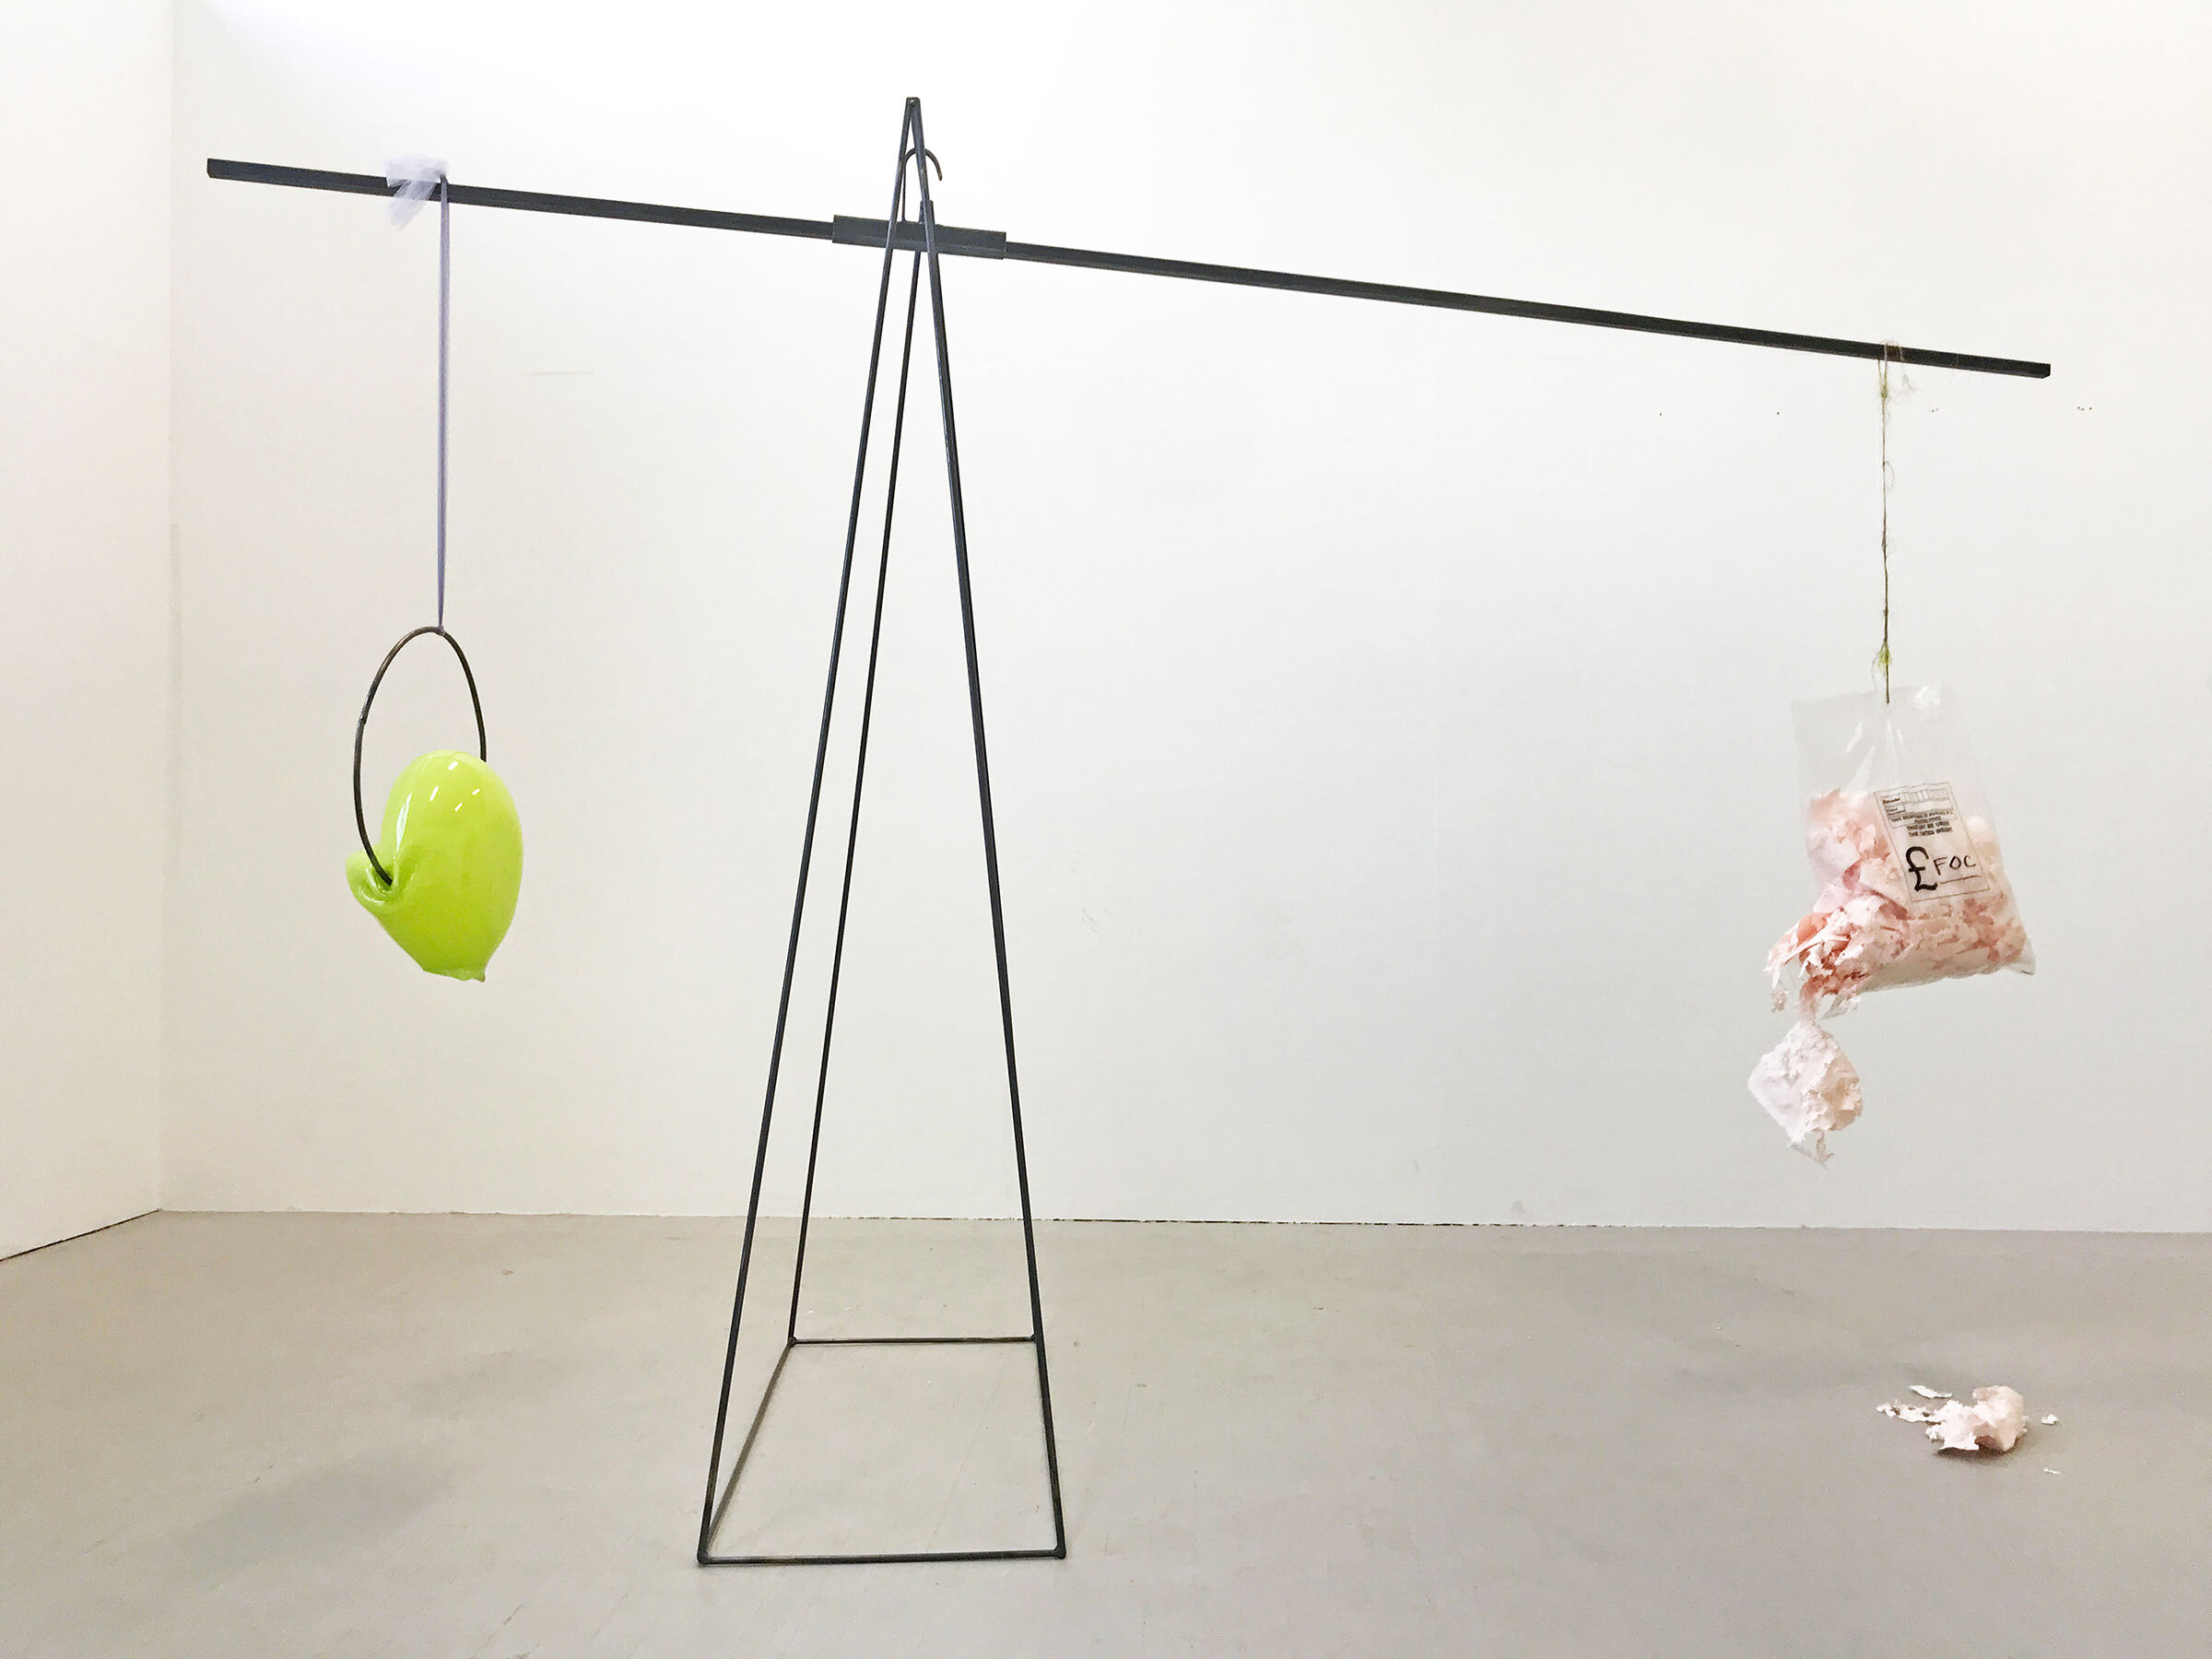  Kelly M O’Brien,  This May Be Under the Stated Weight . Steel, glass, paper, thread, tulle, plastic. 230 x 350 x 122 cm ©2019 